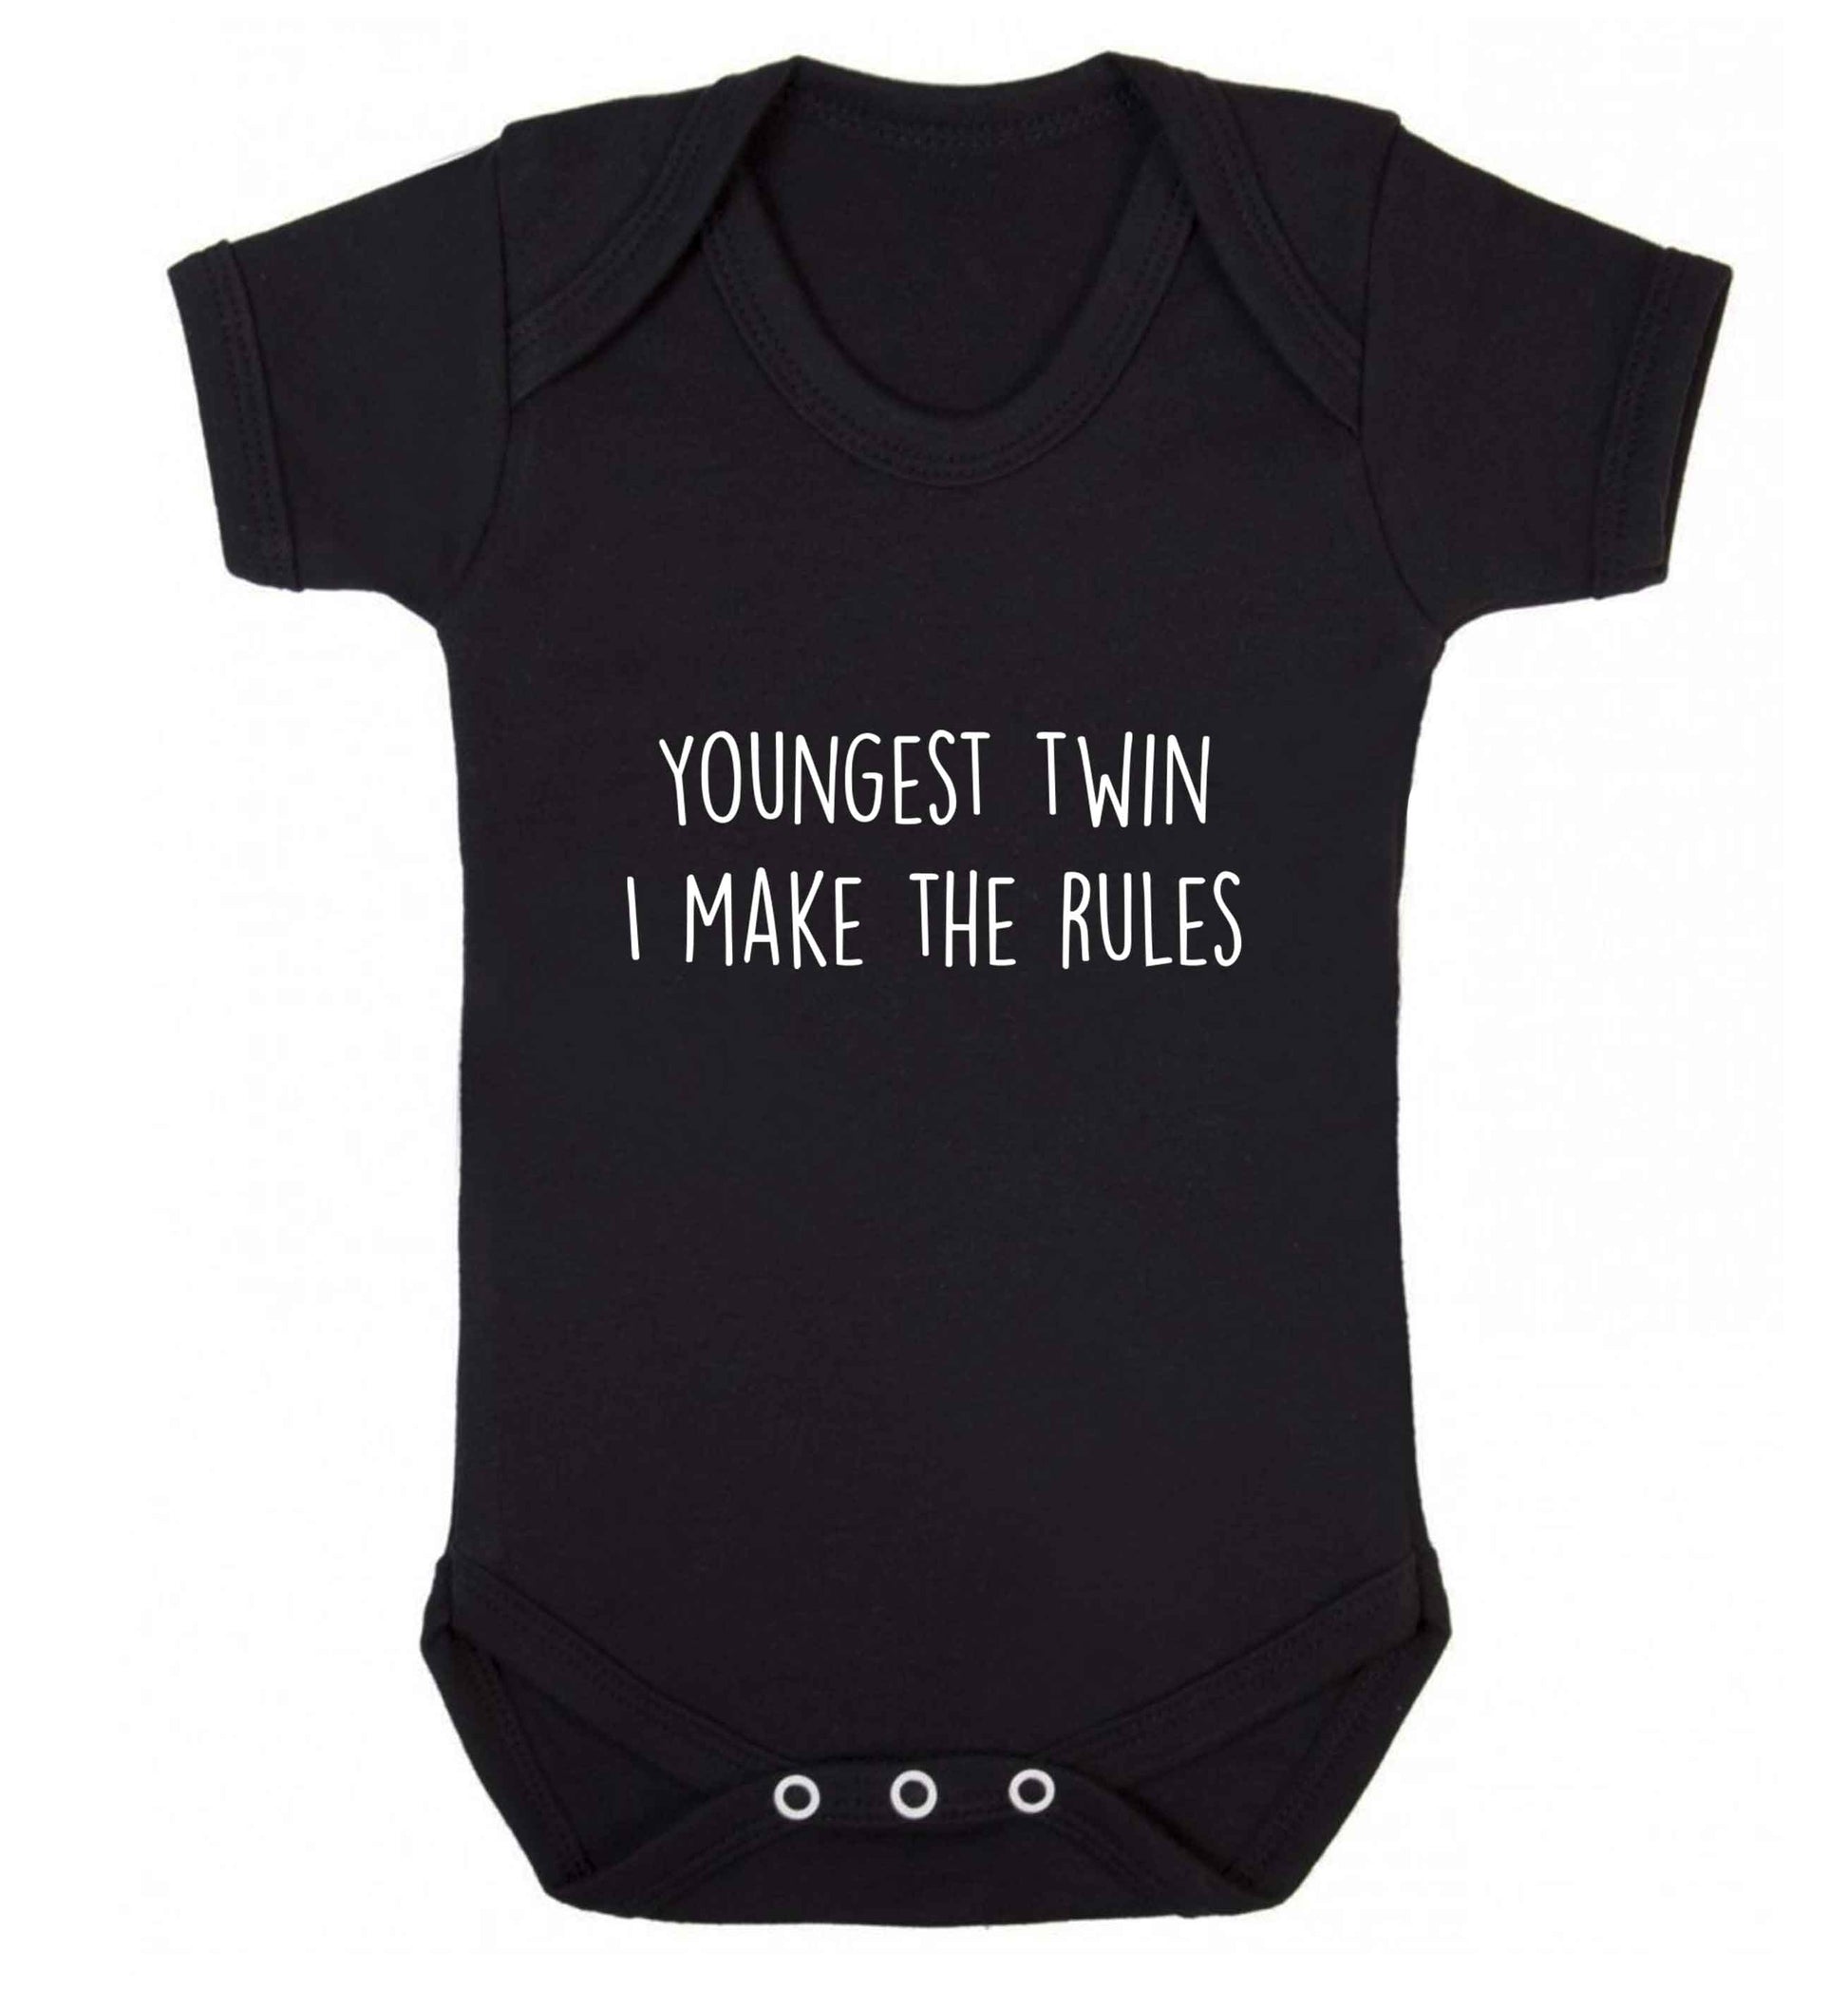 Youngest twin I make the rules baby vest black 18-24 months